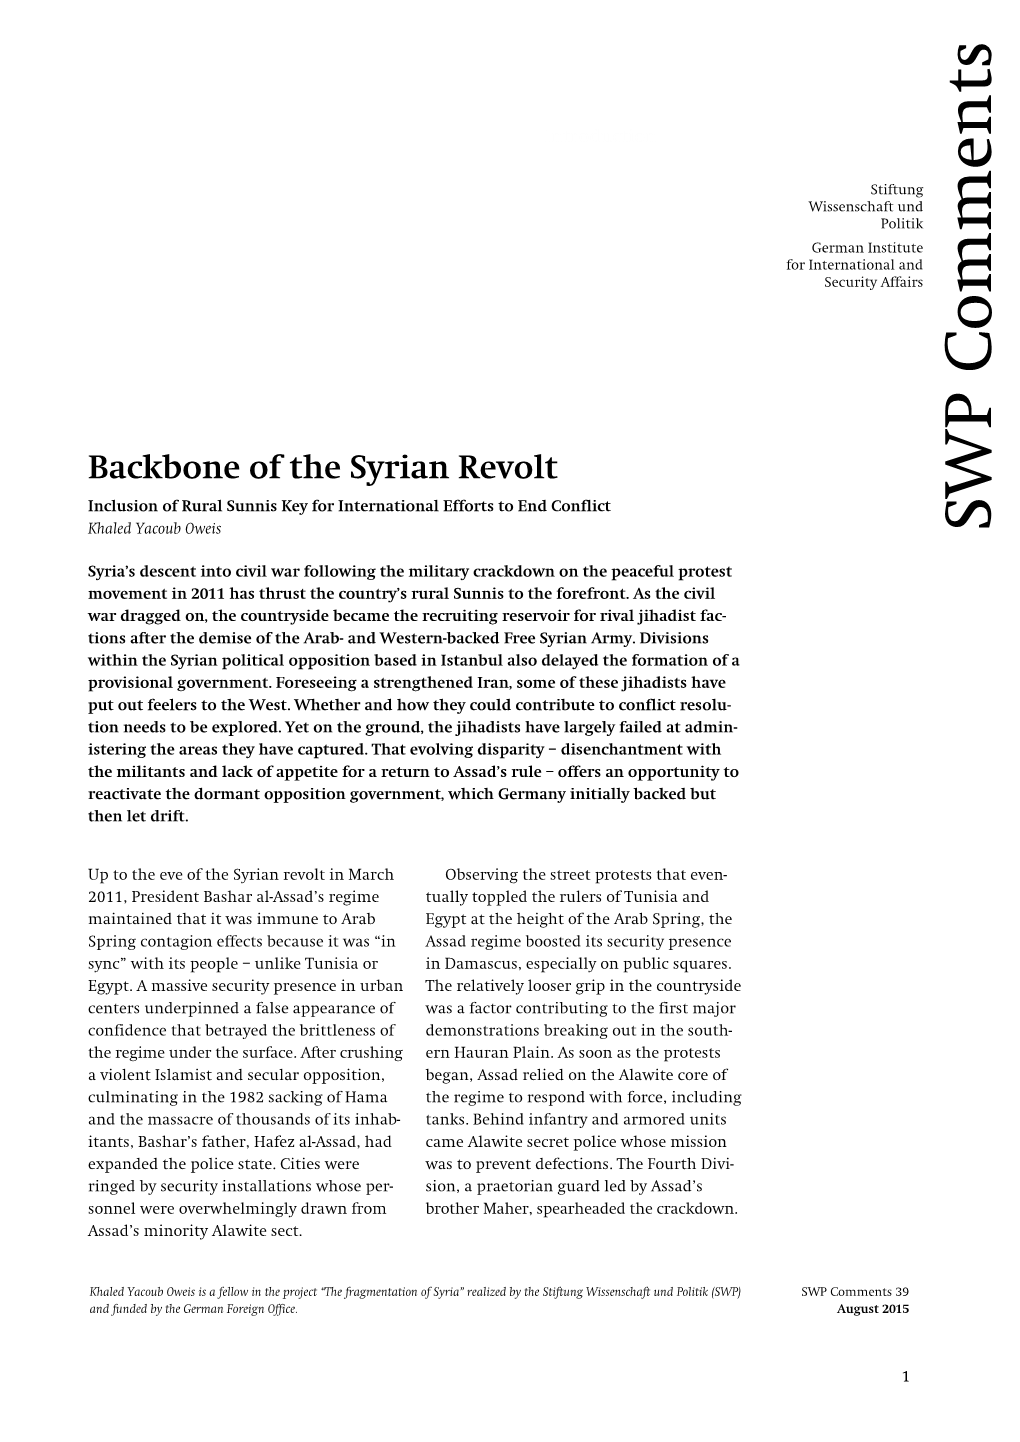 Backbone of the Syrian Revolt. Inclusion of Rural Sunnis Key For